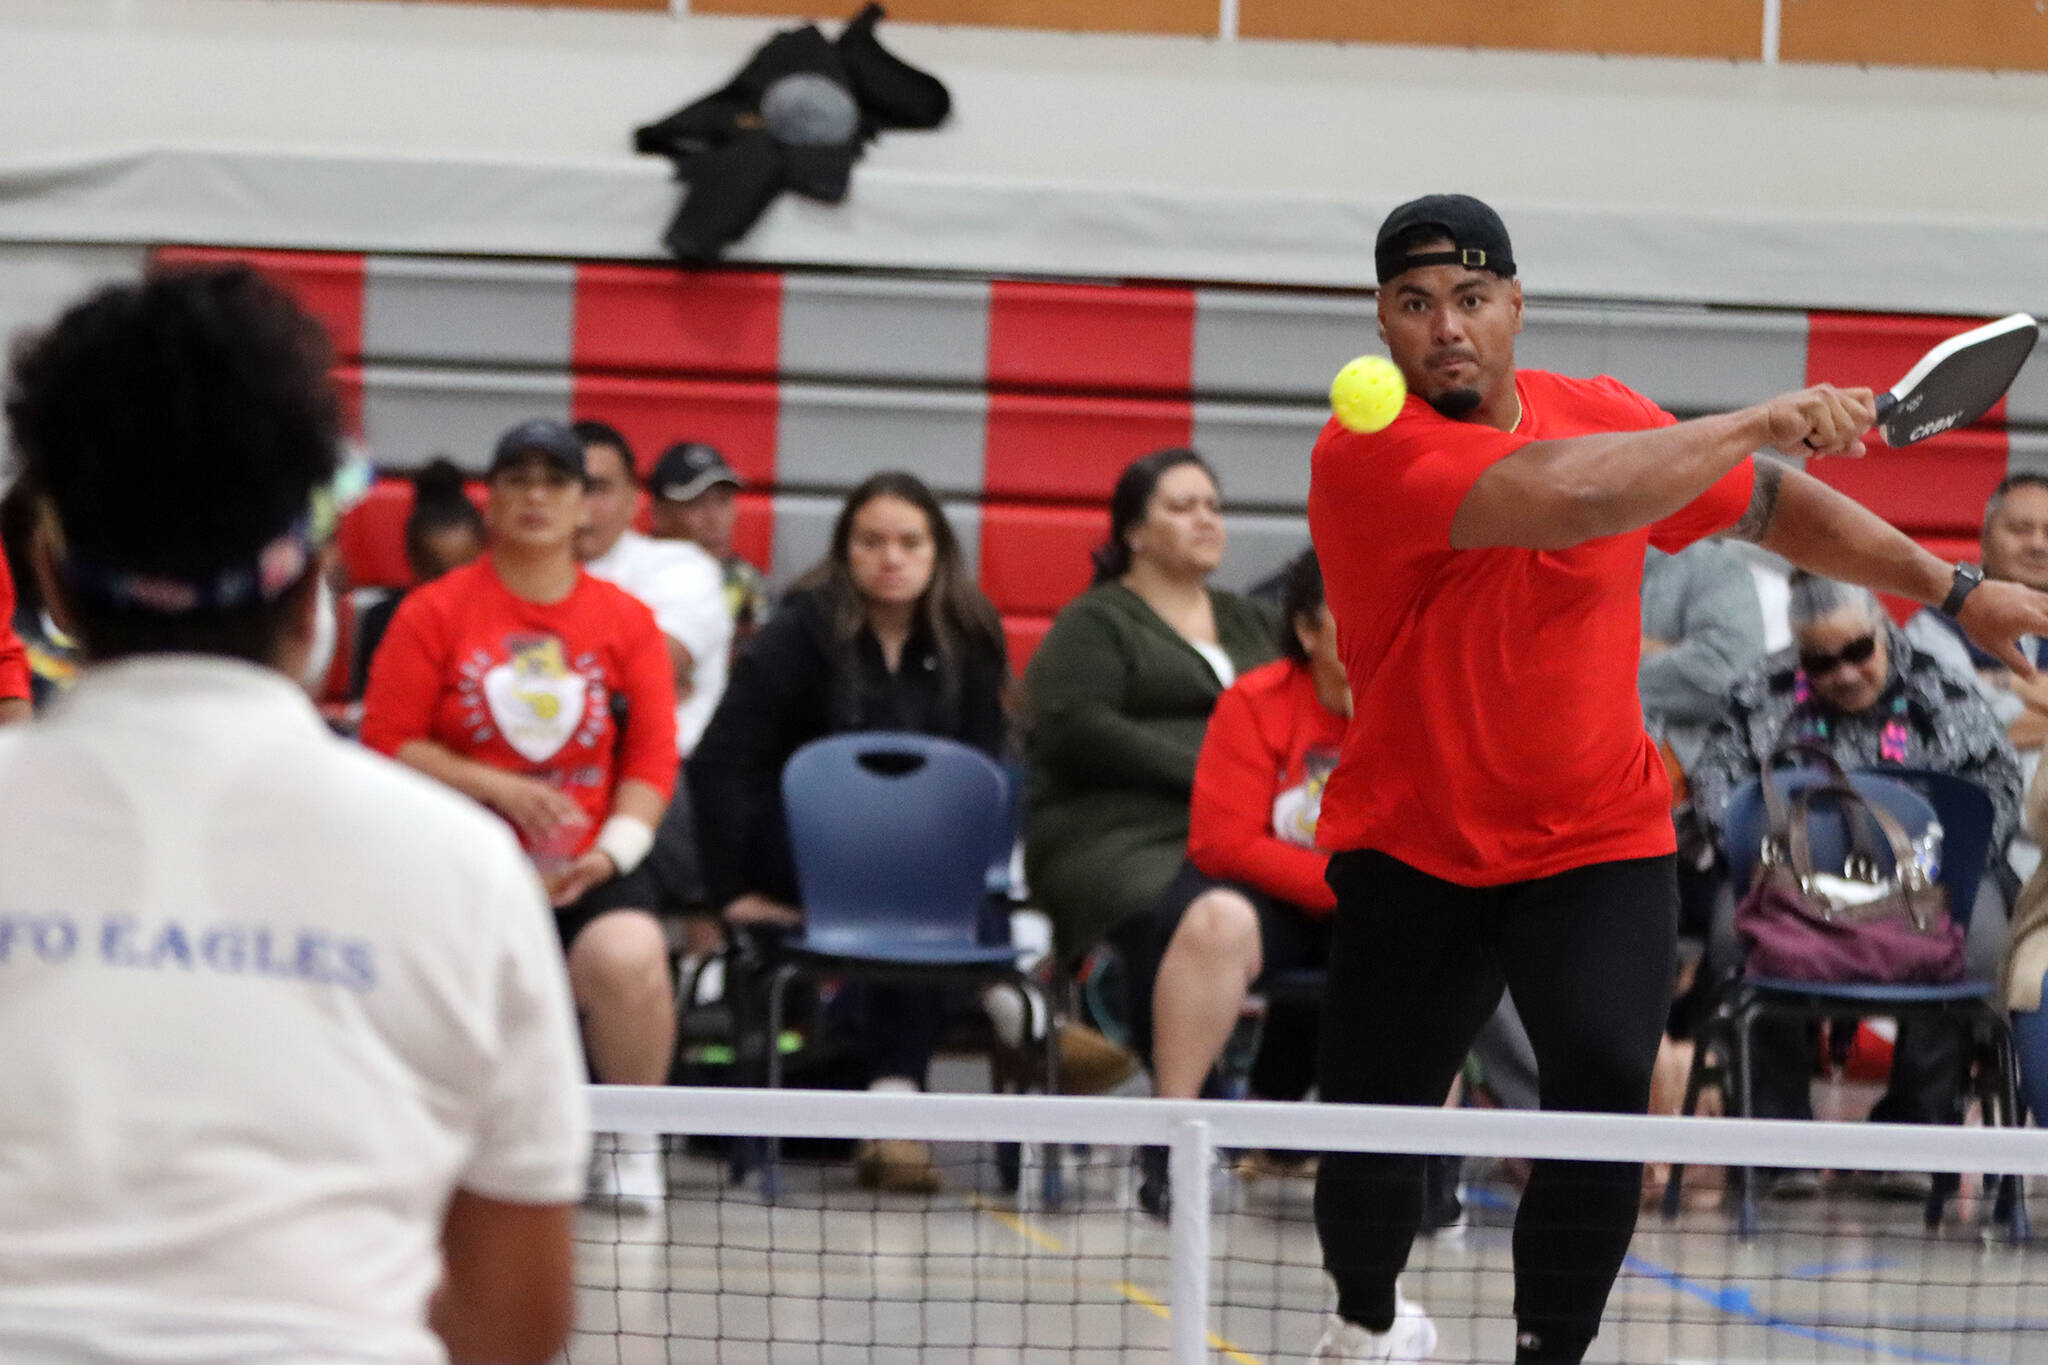 Stephen Paea sends a pickleball over the net Saturday at Floyd Dryden Middle School. Paea and wife, Vika Toetuu Paea, claimed the top spot in the tournament’s advanced mixed division. (Ben Hohenstatt / Juneau Empire)